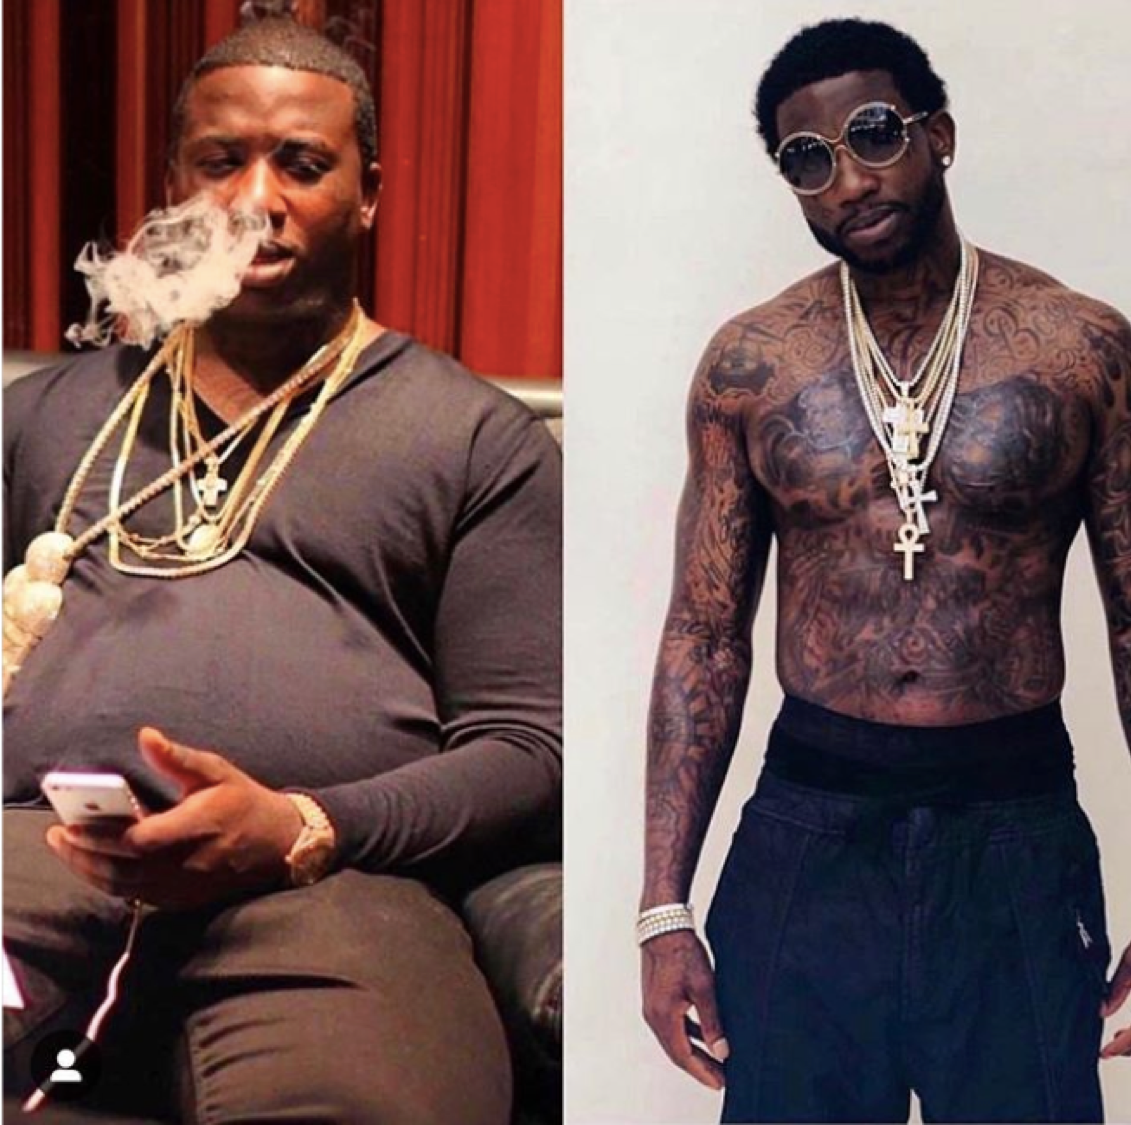 The Transformation of Gucci Mane: “I shook off my demons now I'm back to  myself” -  - Where Wellness & Culture Connect